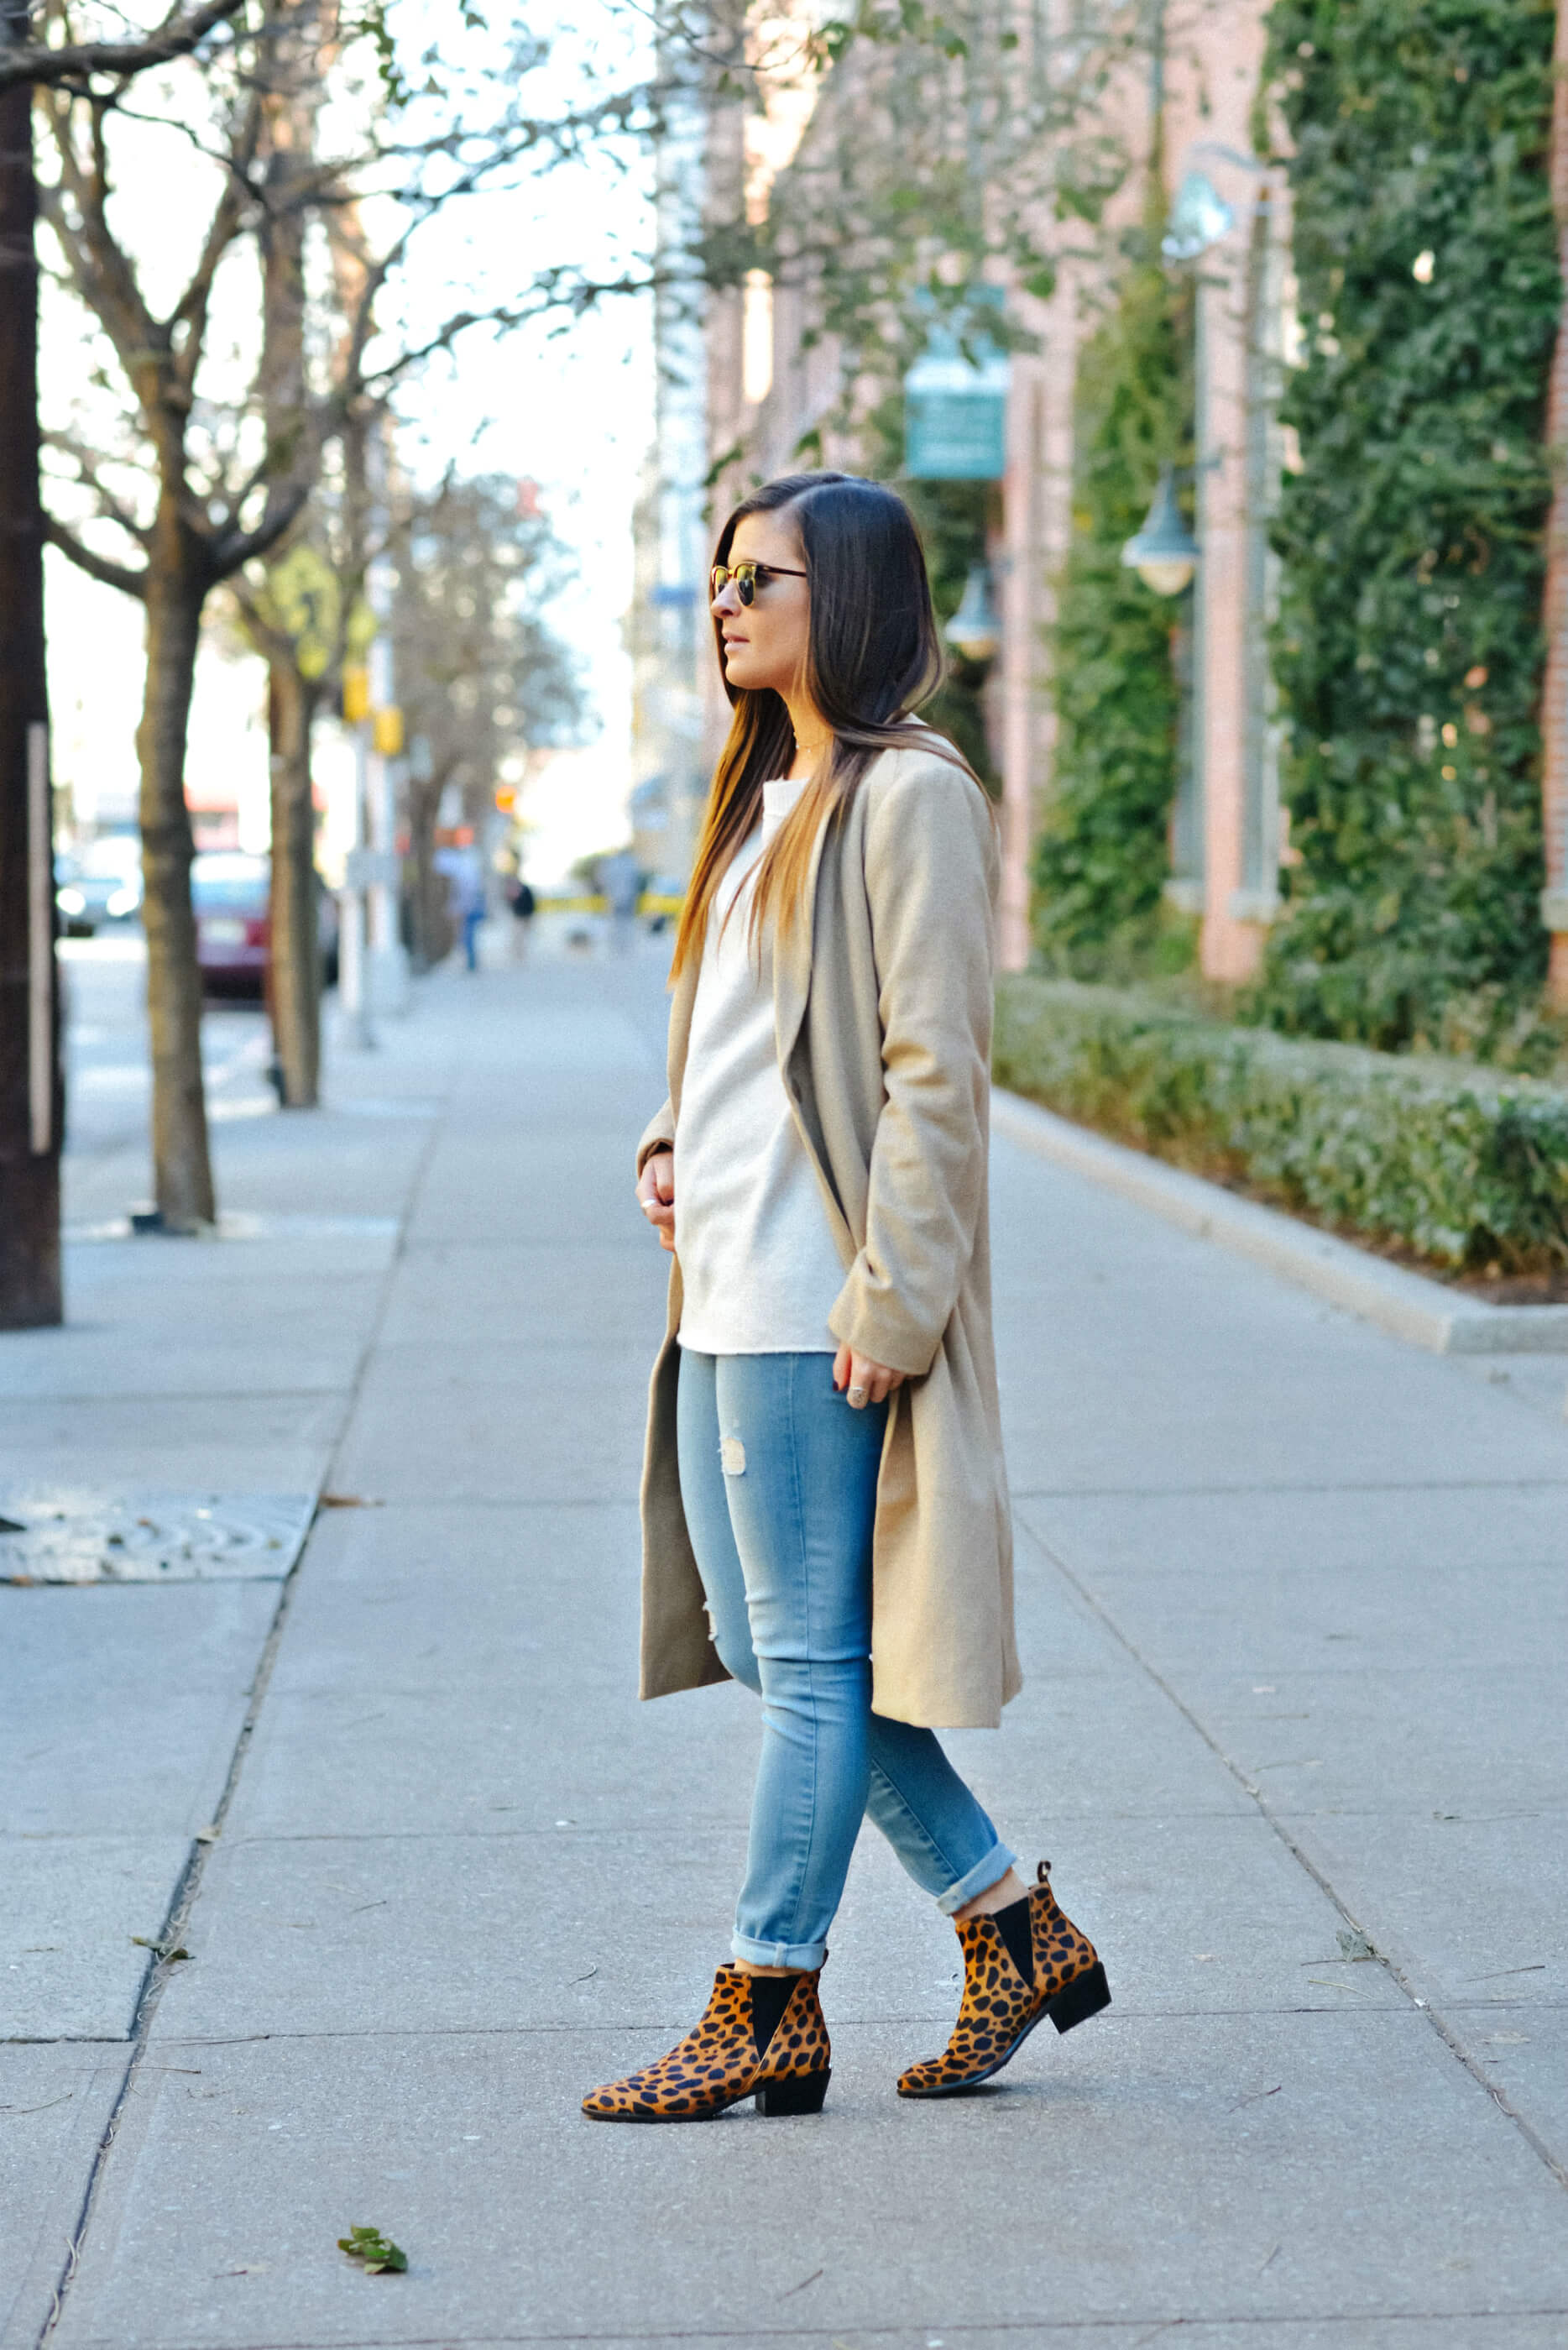 Fall Outfit Ideas, Camel Coat, Leopard Booties, Tilden of To Be Bright